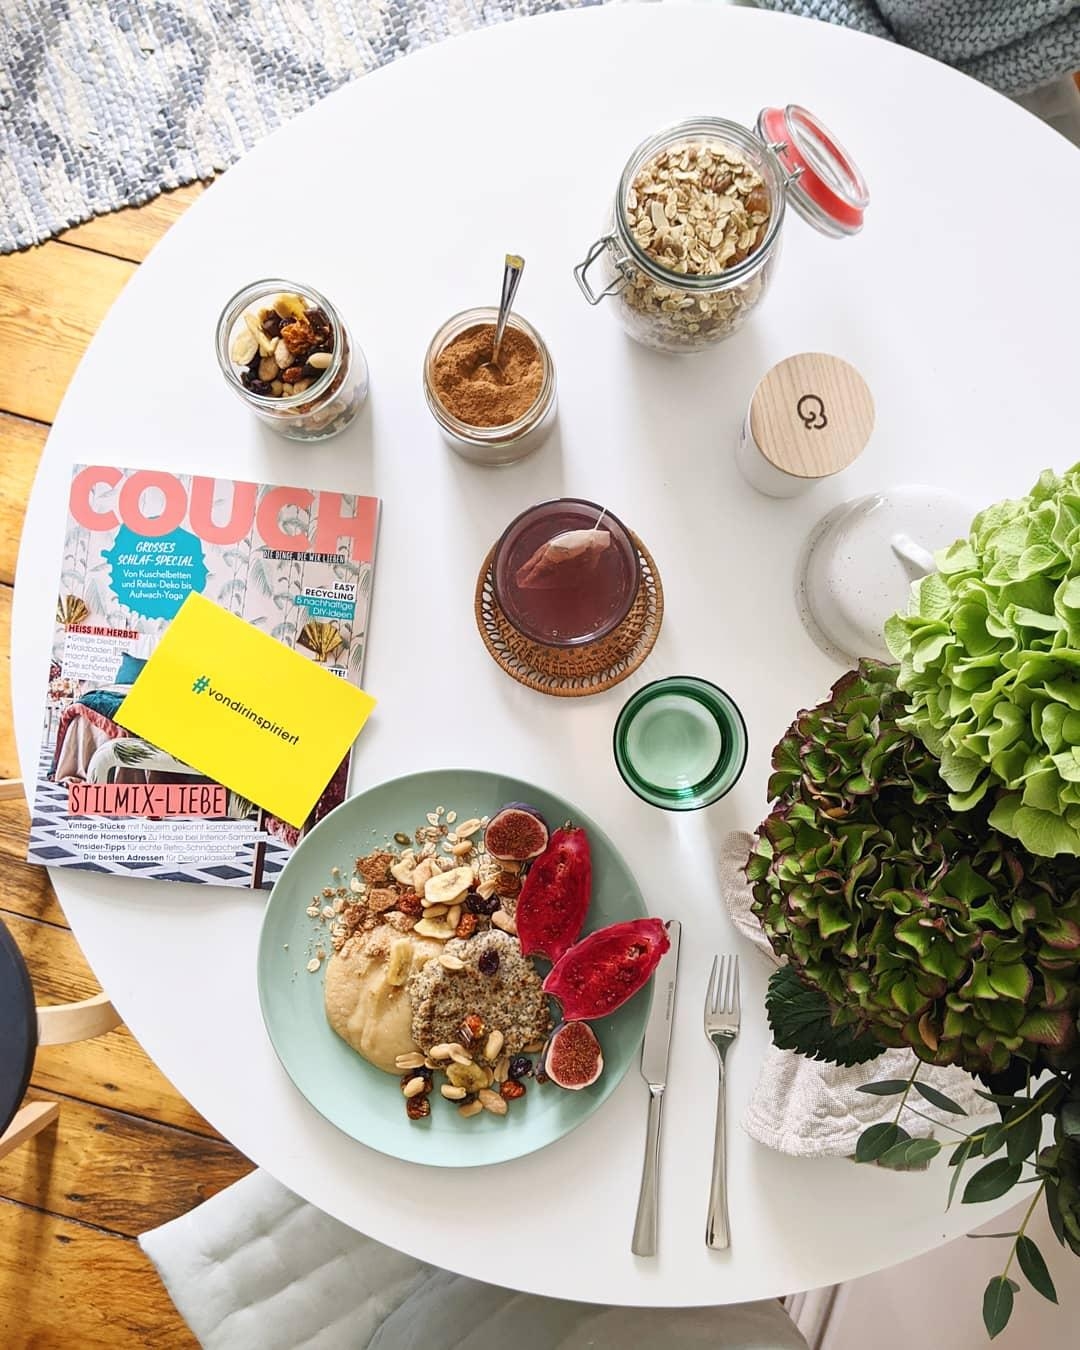 November-Ausgabe. #goodmorning #doyoureadme #couchmagazin #couchstyle #kitchentable #couchies